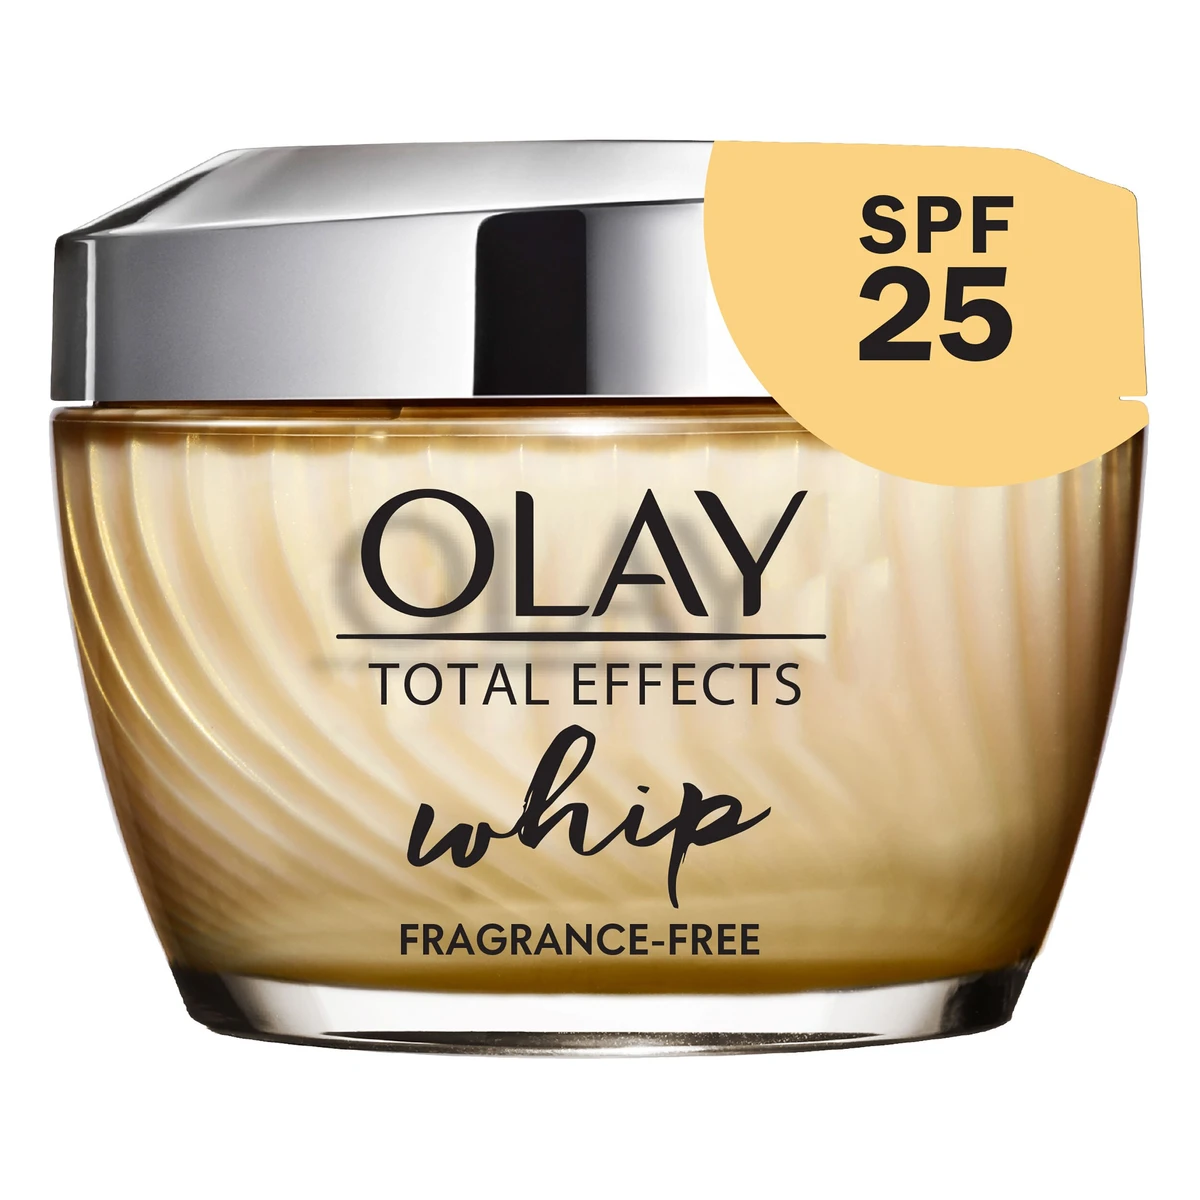 Olay Total Effects Whip Fragrance Free Facial Moisturizer  SPF 25  1.7oz